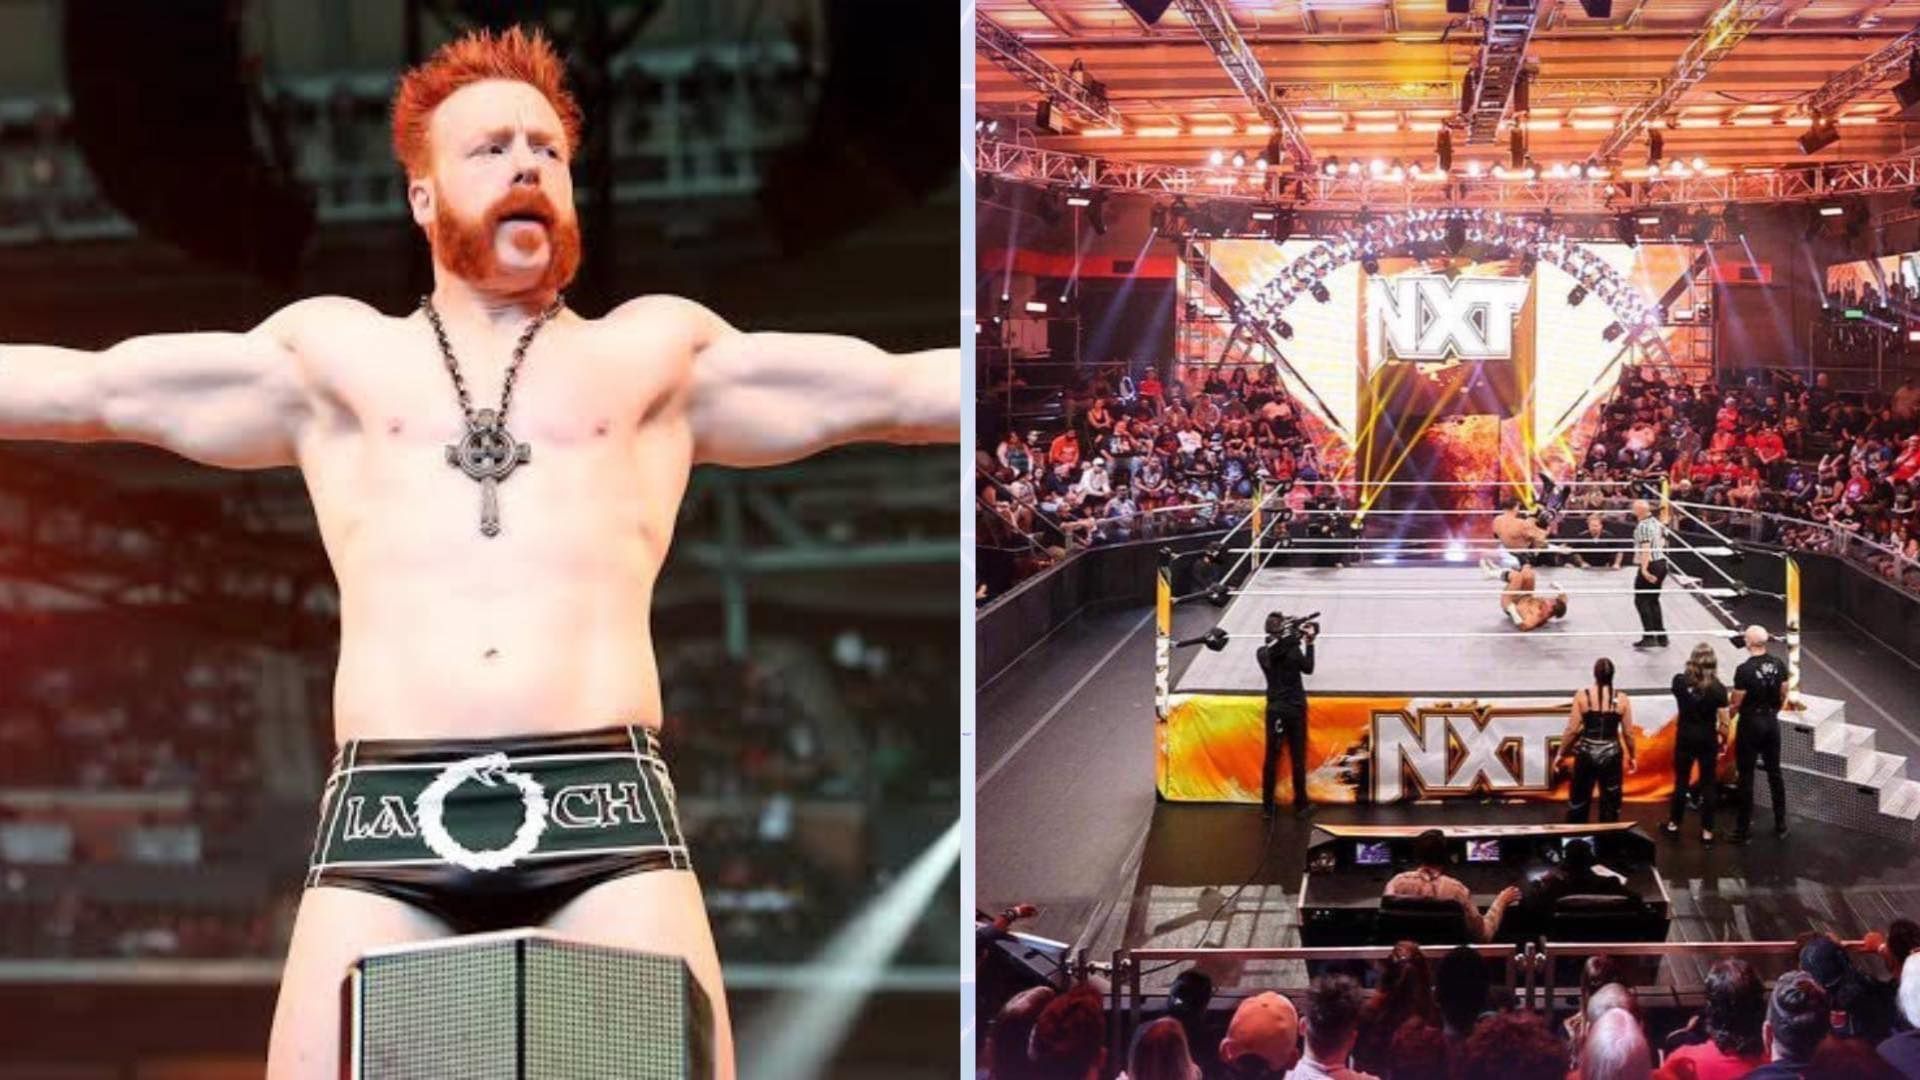 Sheamus gets a surprise tribute in a major match [Image Credits: WWE]